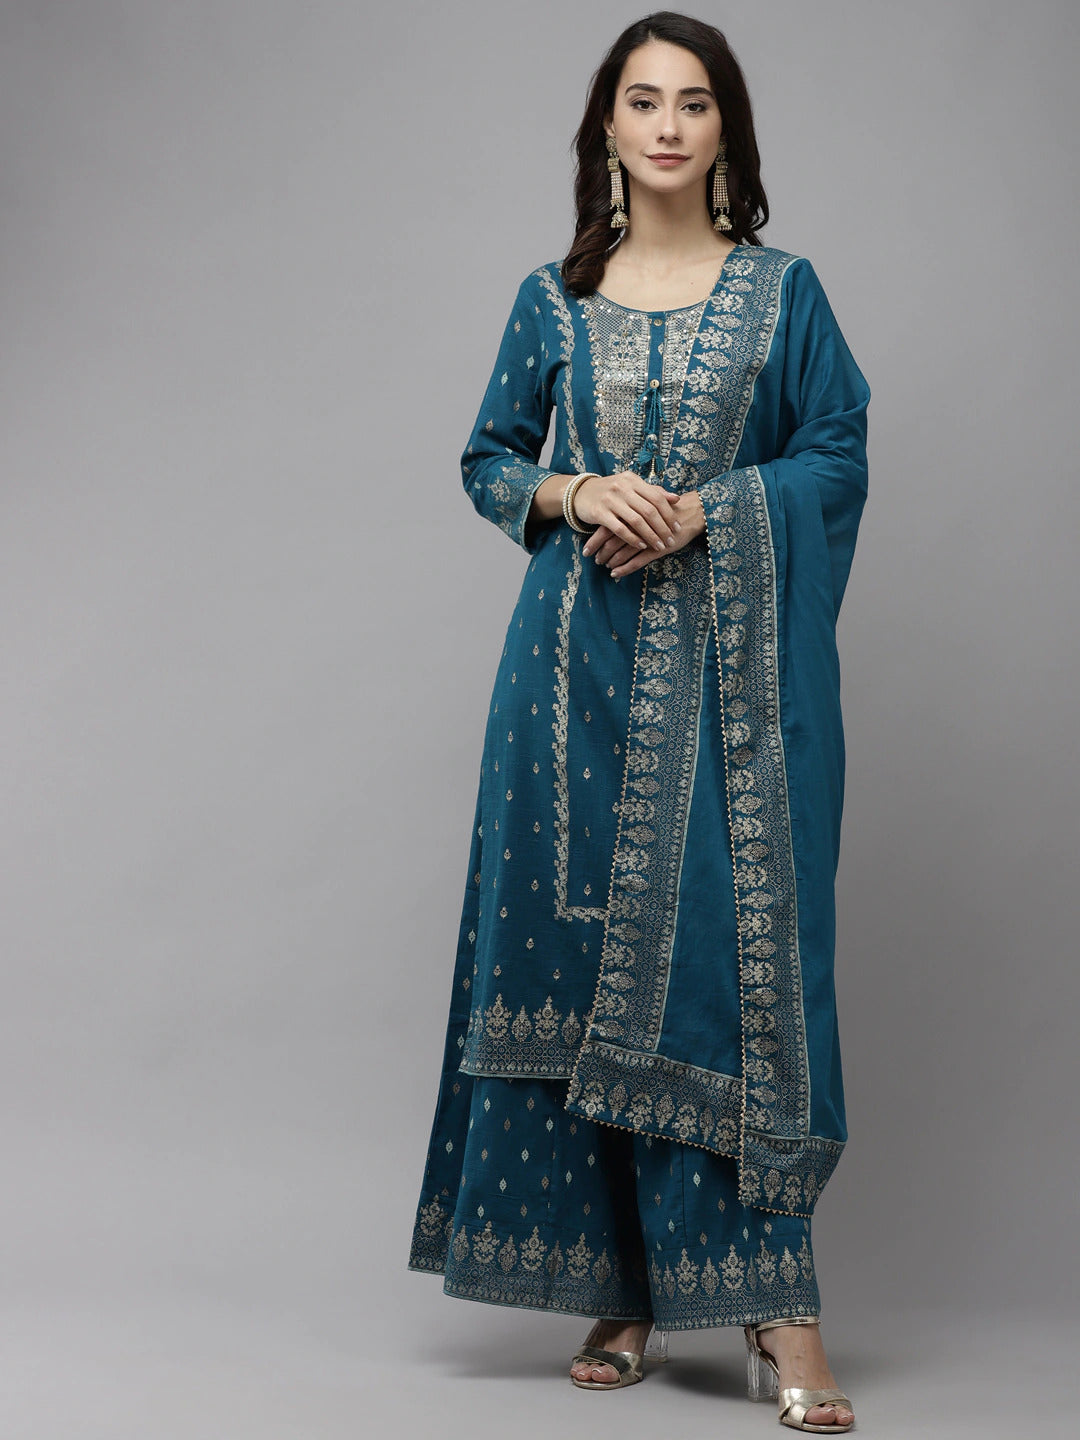 Teal Kurta Sharara Set - Indian Clothing in Denver, CO, Aurora, CO, Boulder, CO, Fort Collins, CO, Colorado Springs, CO, Parker, CO, Highlands Ranch, CO, Cherry Creek, CO, Centennial, CO, and Longmont, CO. Nationwide shipping USA - India Fashion X